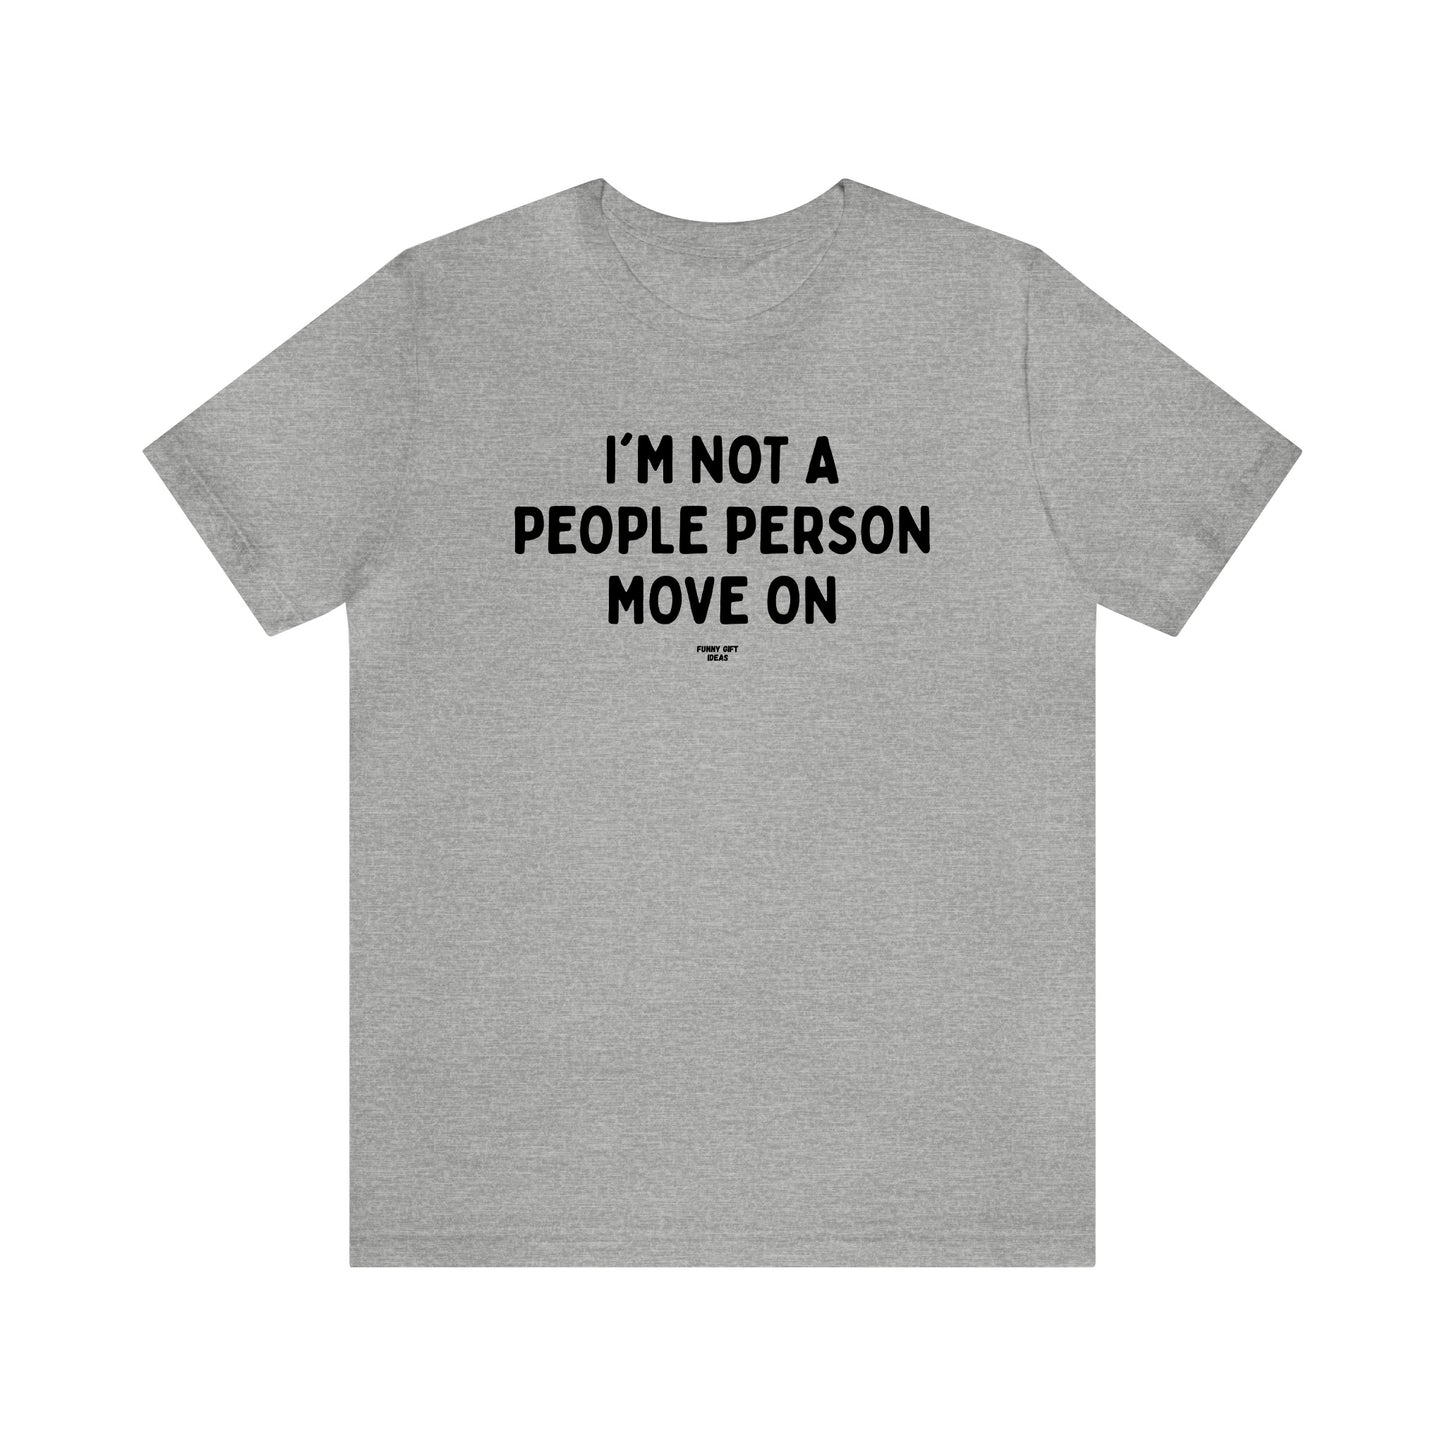 Mens T Shirts - I'm Not a People Person Move on - Funny Men T Shirts